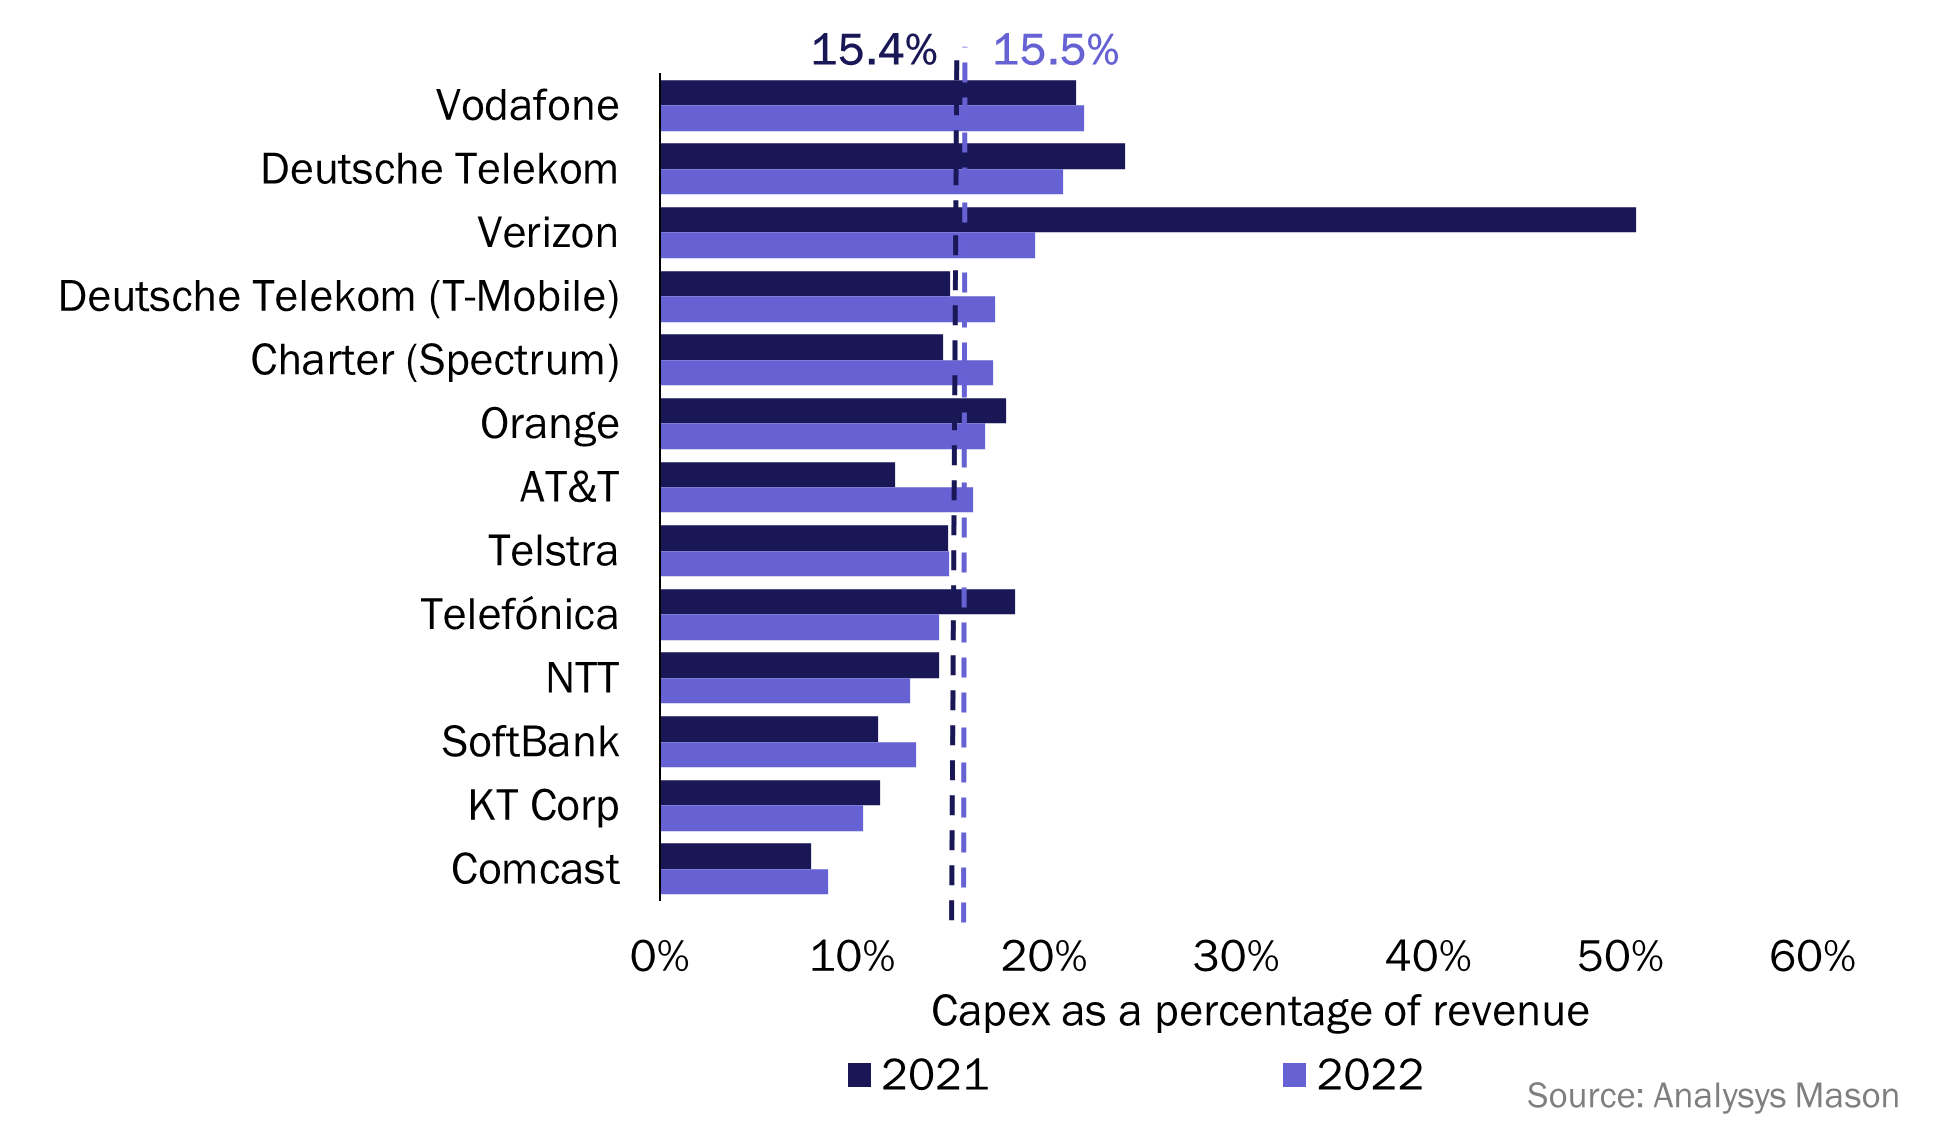 Figure 3: Capex as a percentage of revenue, and average capex as a percentage of revenue (indicated by dashed lines), selected operators, 2021 and 2022